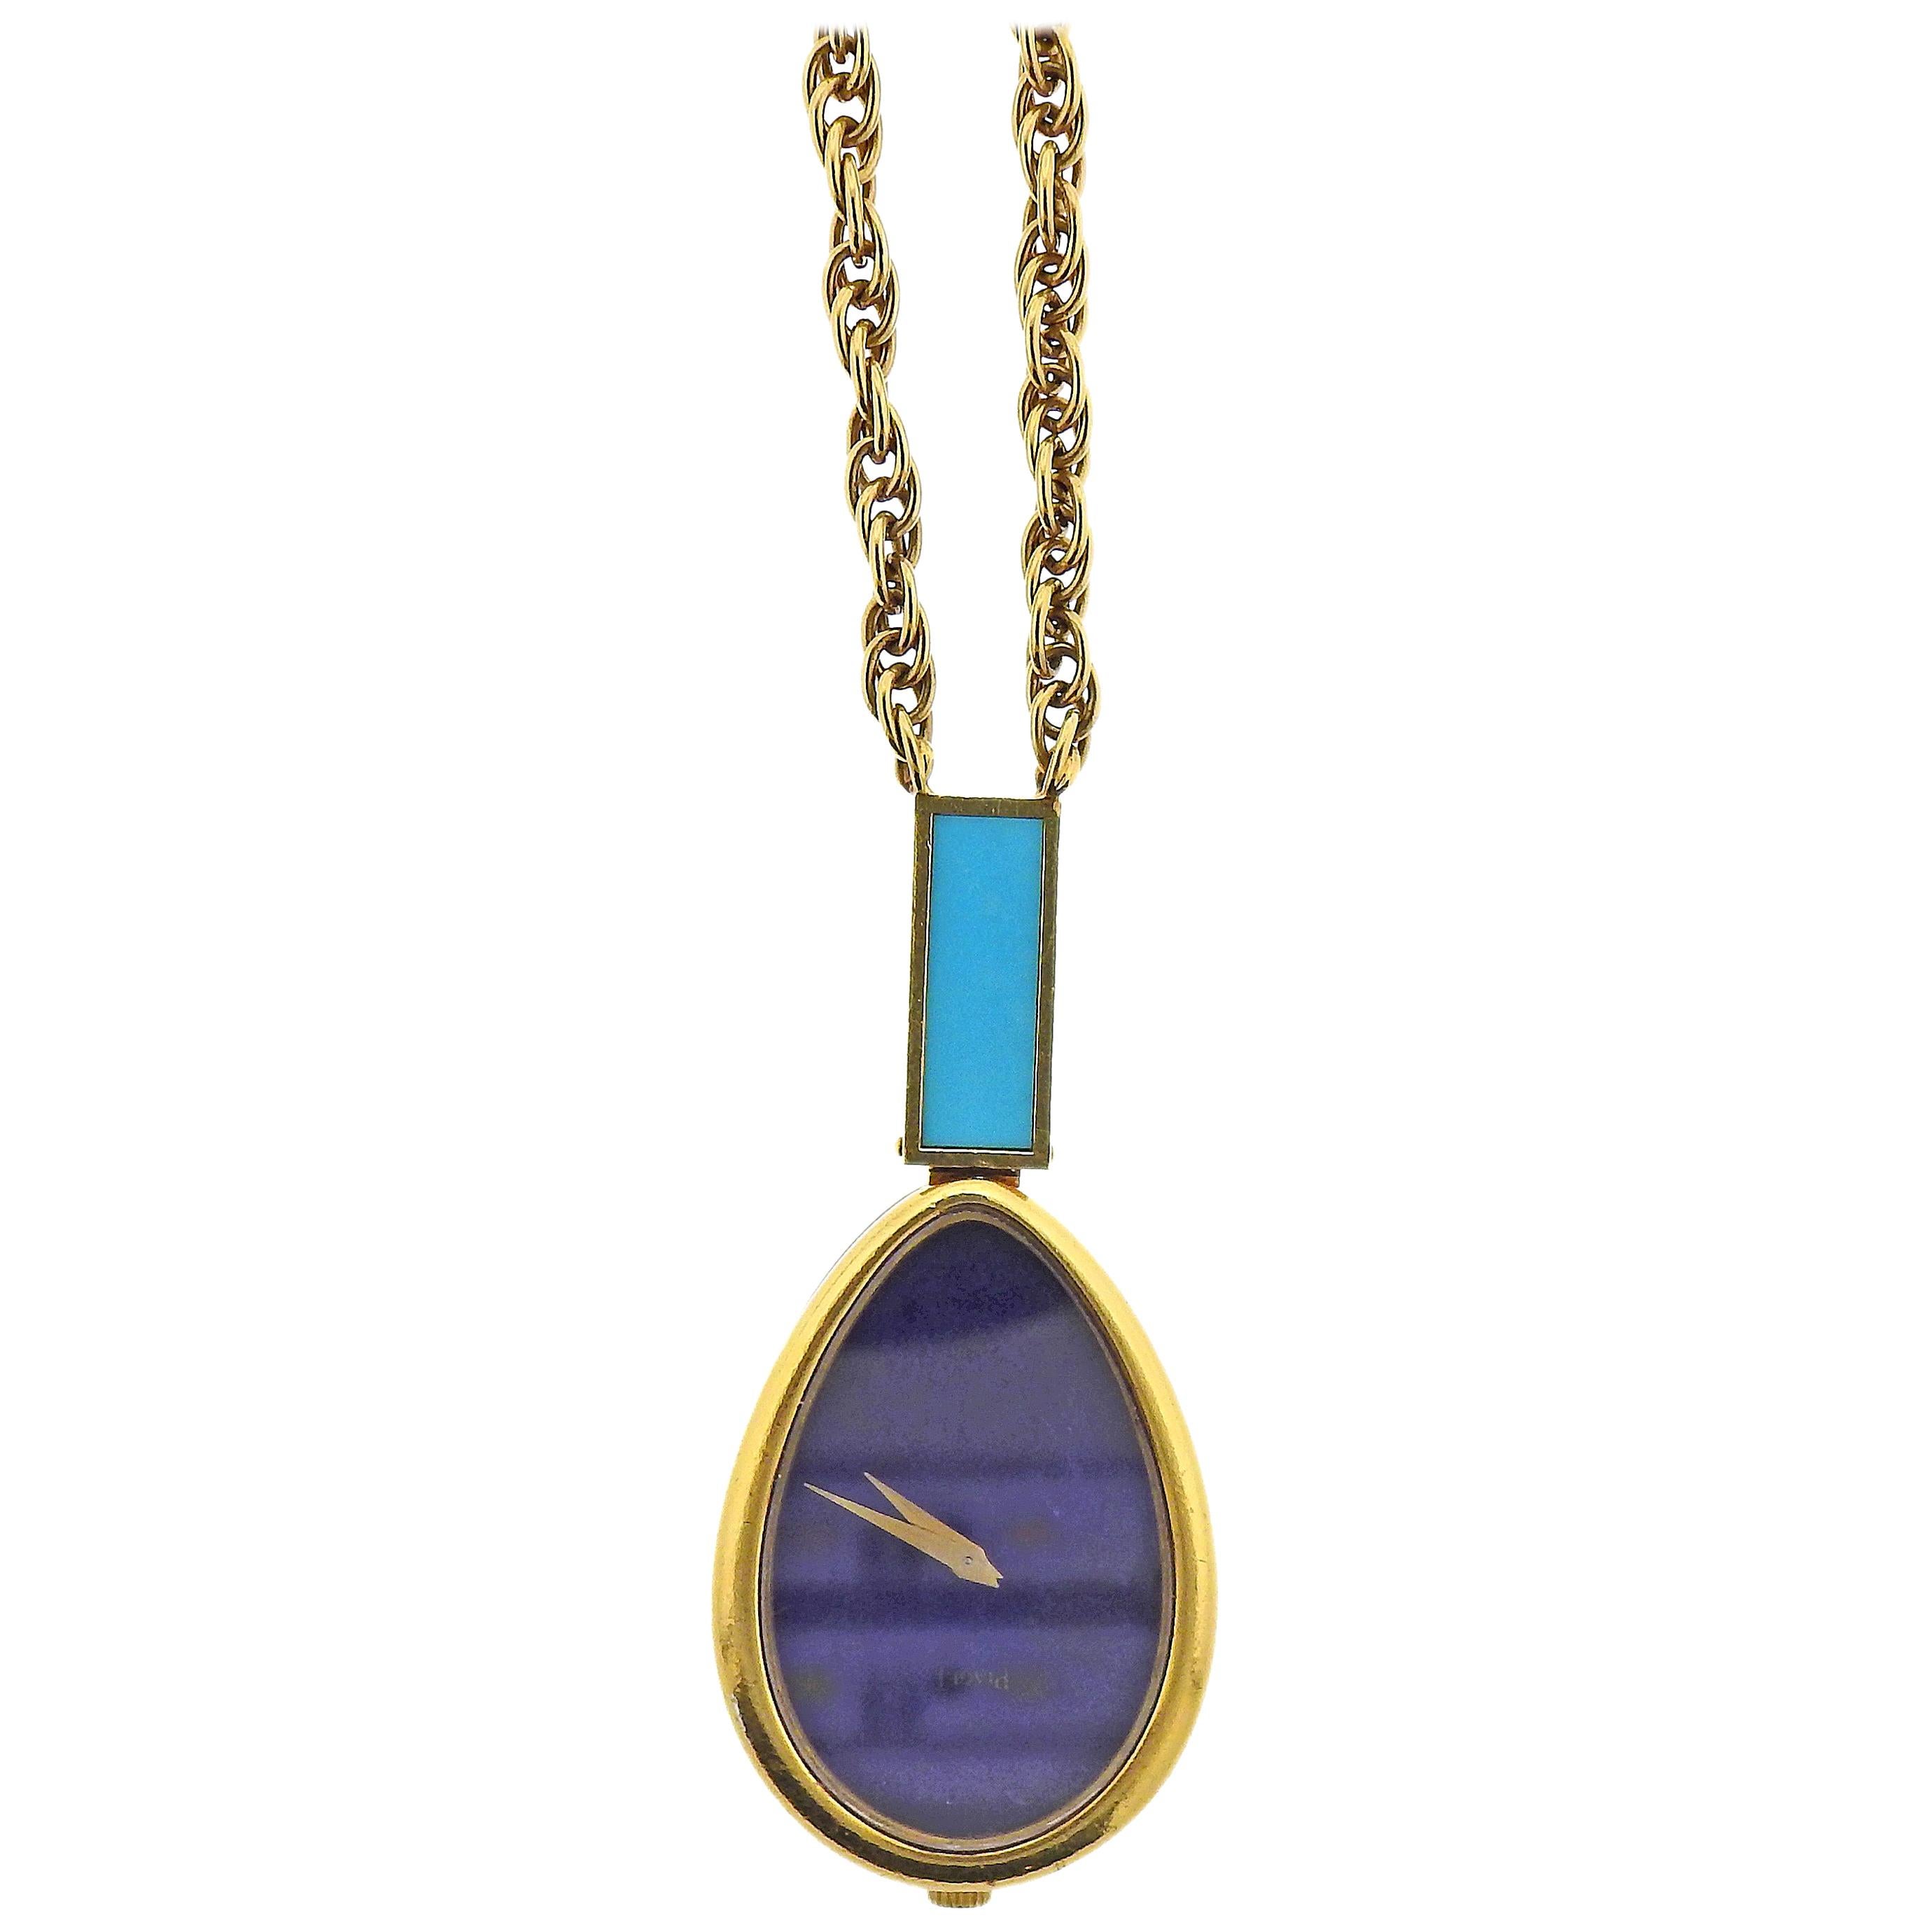 Piaget Rare 1970s Lapis Dial Turquoise Gold Watch Pendant Necklace